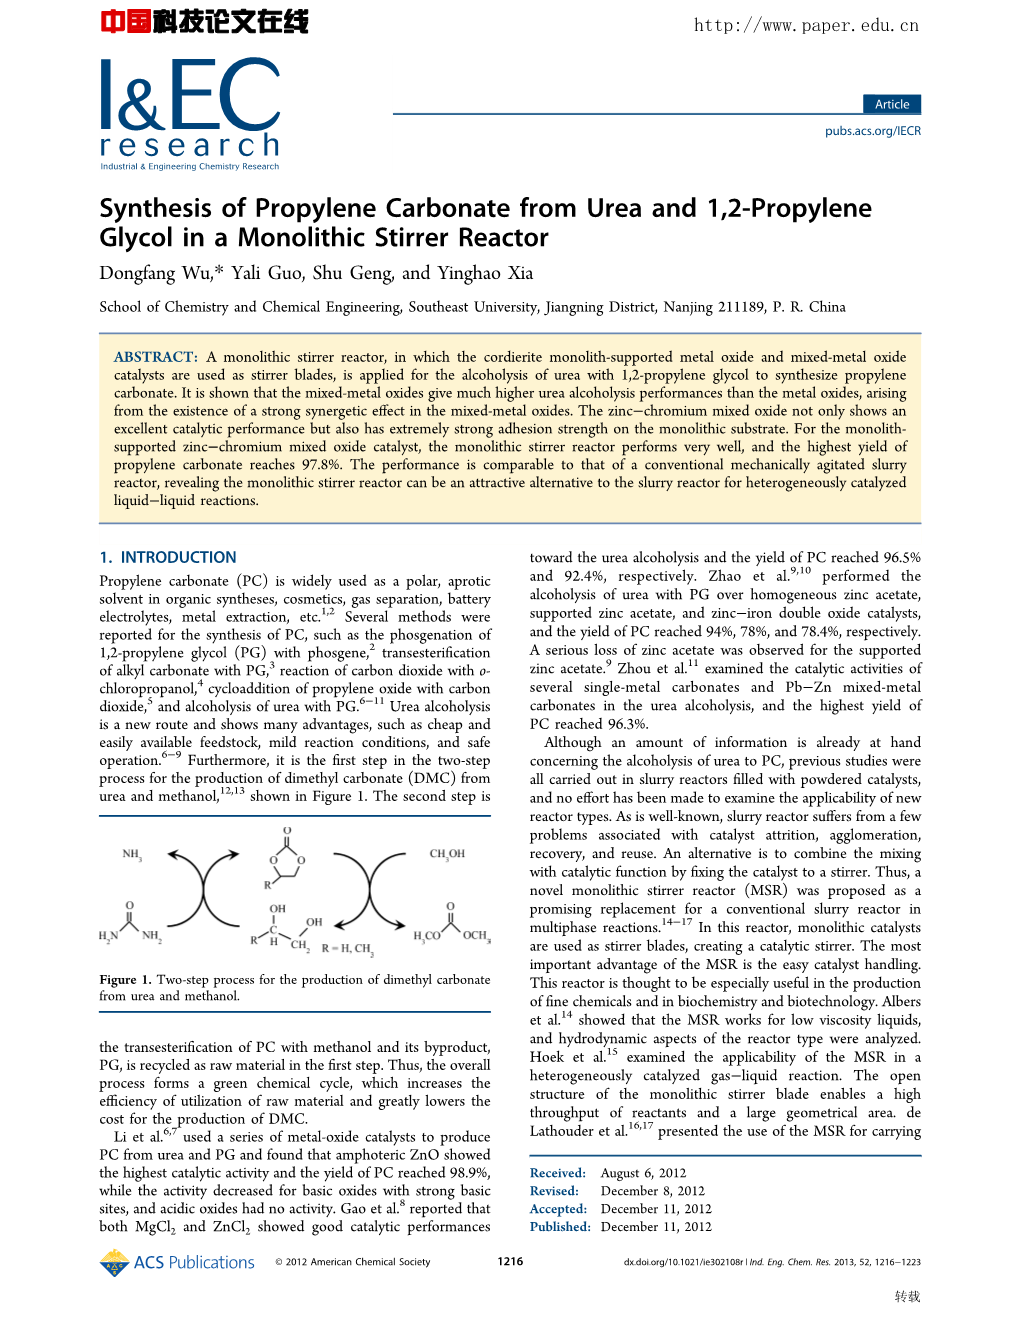 Synthesis of Propylene Carbonate from Urea and 1